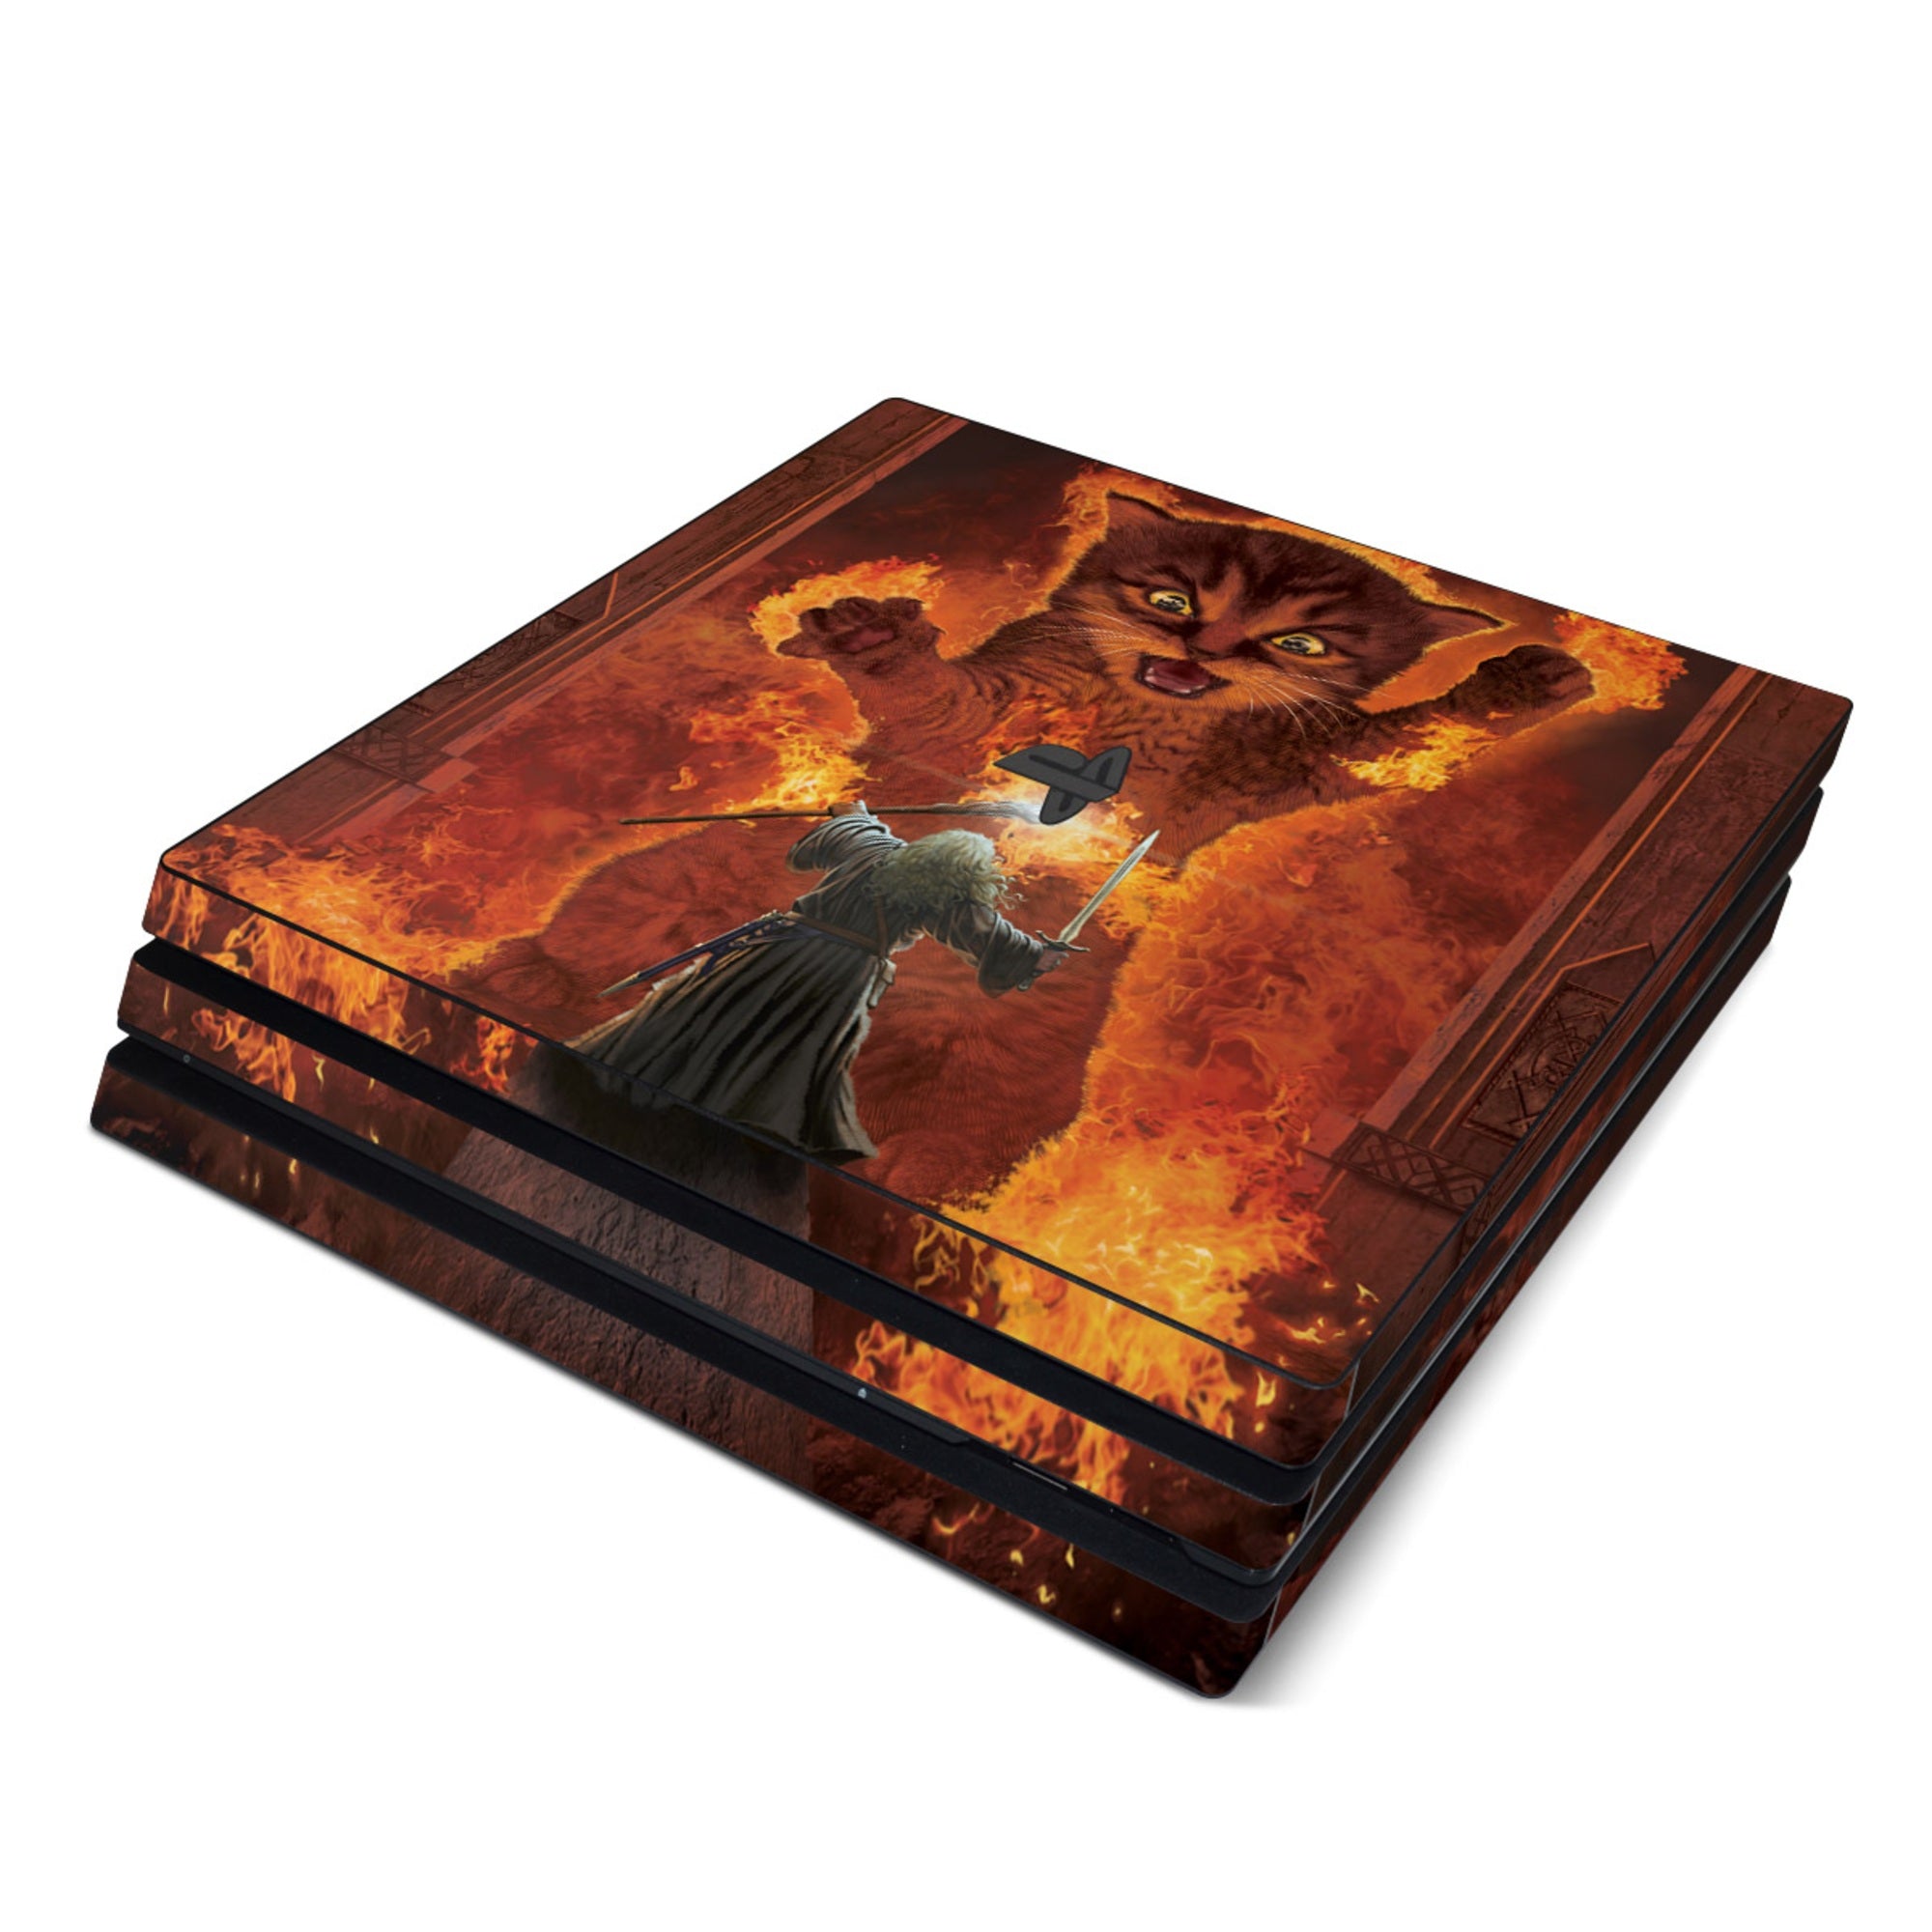 You Shall Not Pass - Sony PS4 Pro Skin